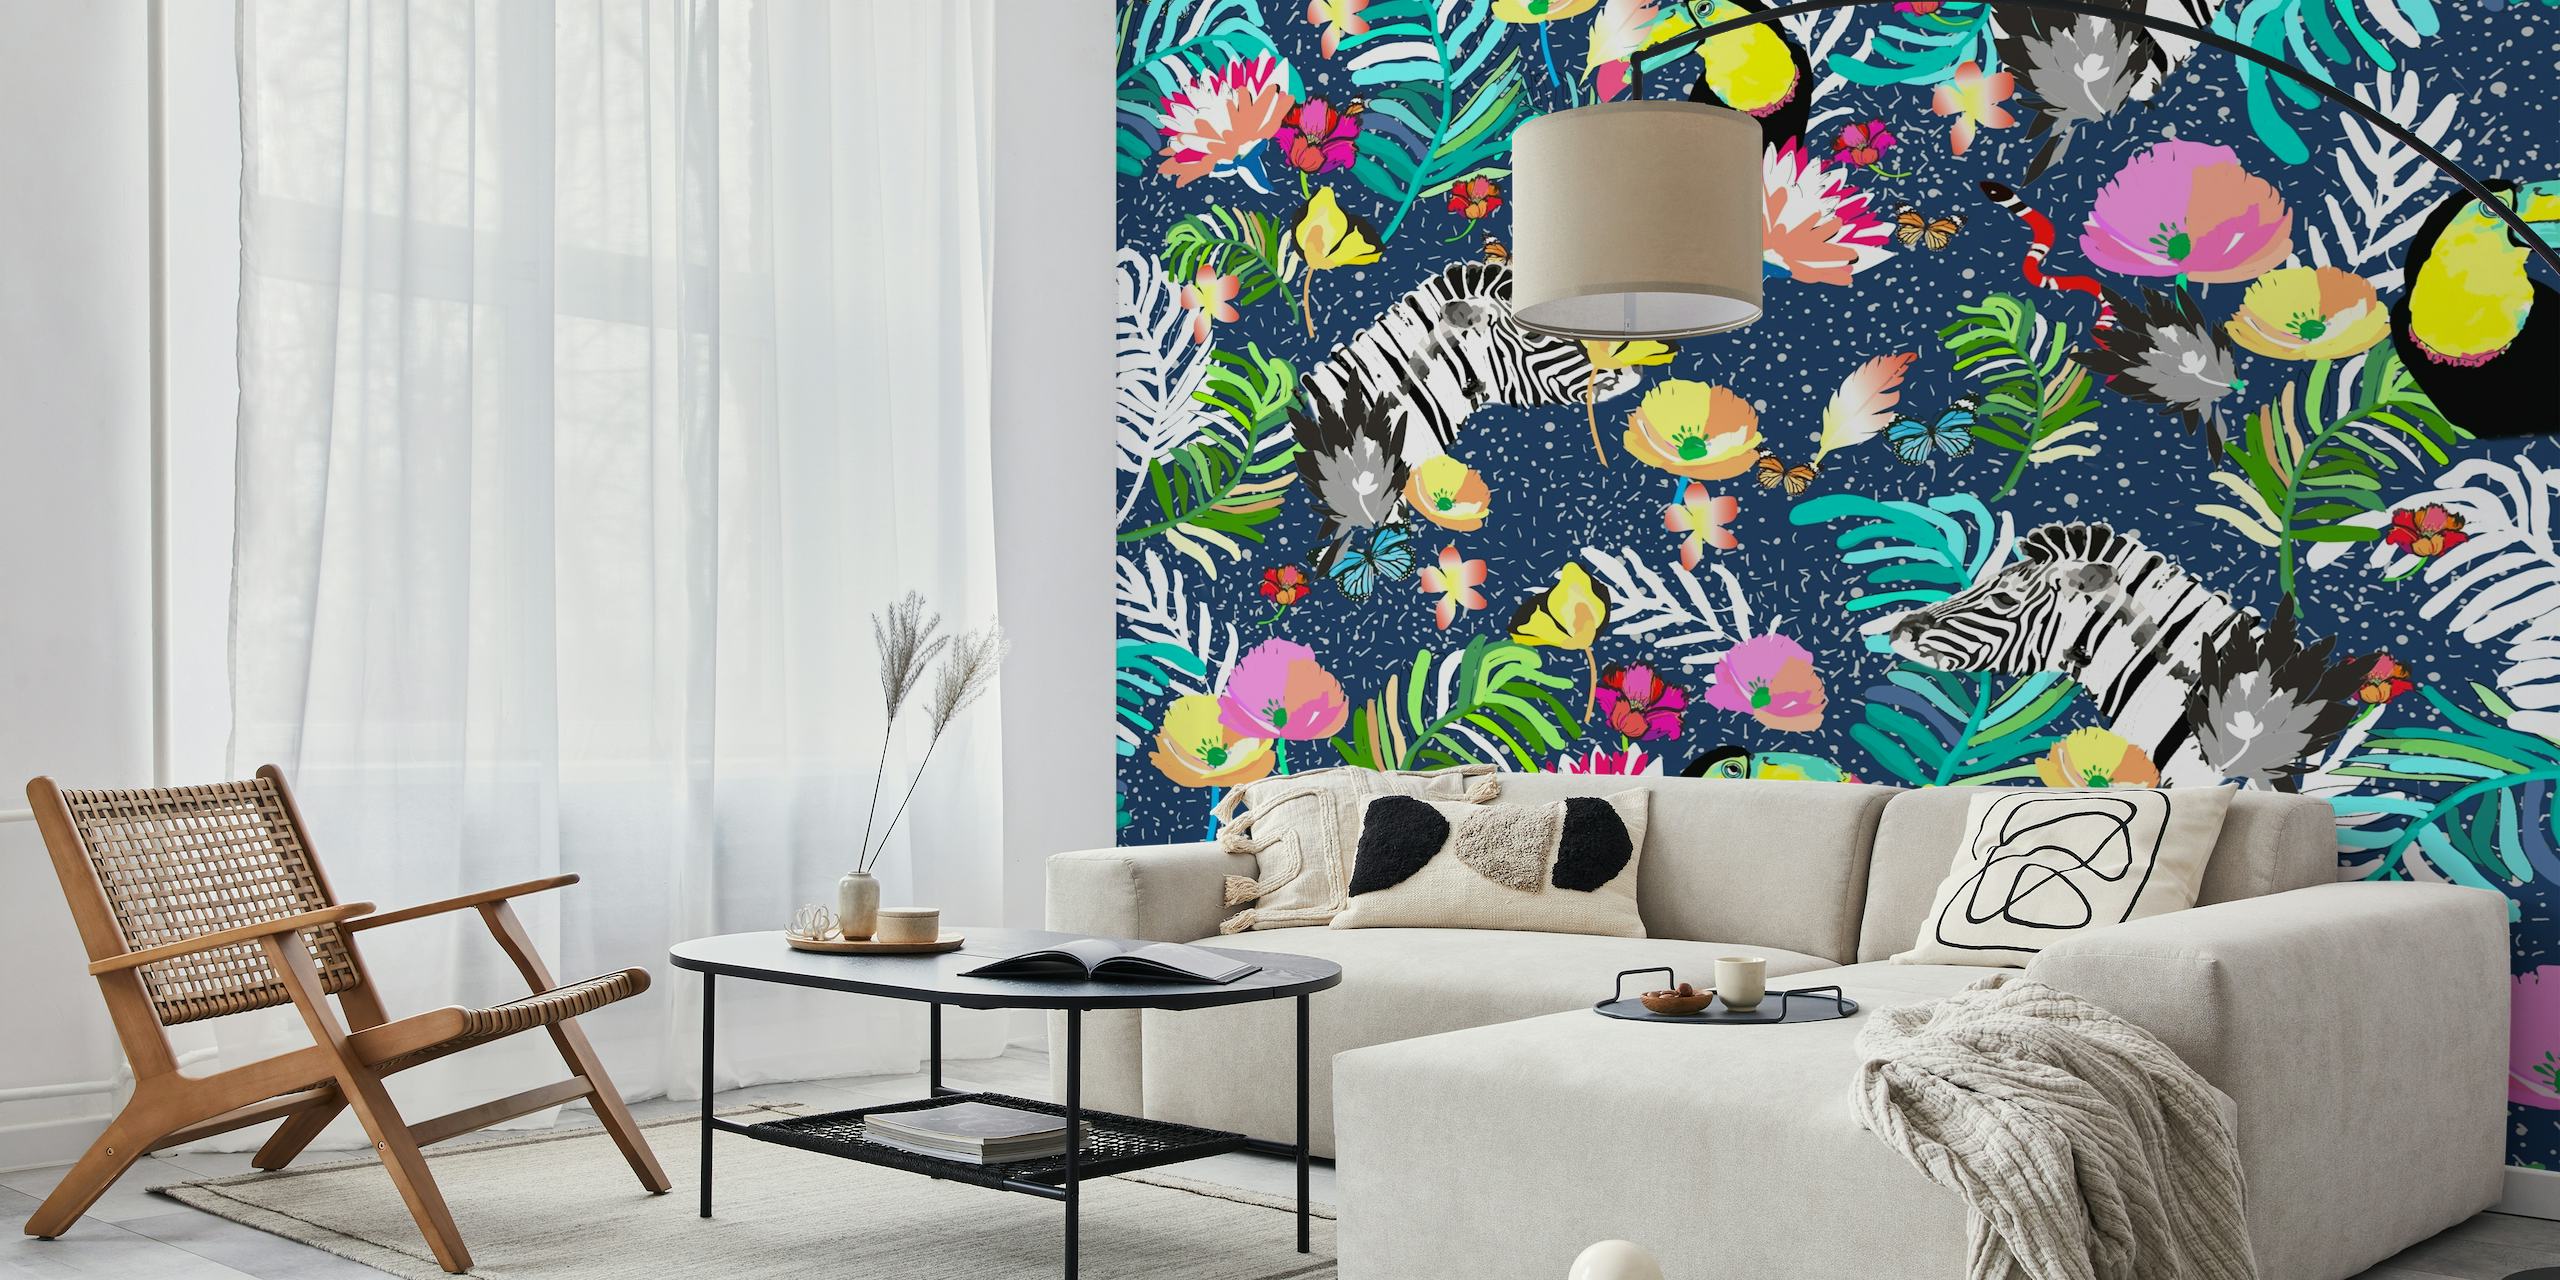 Tropical jungle-themed wall mural with vibrant colors and exotic animals.